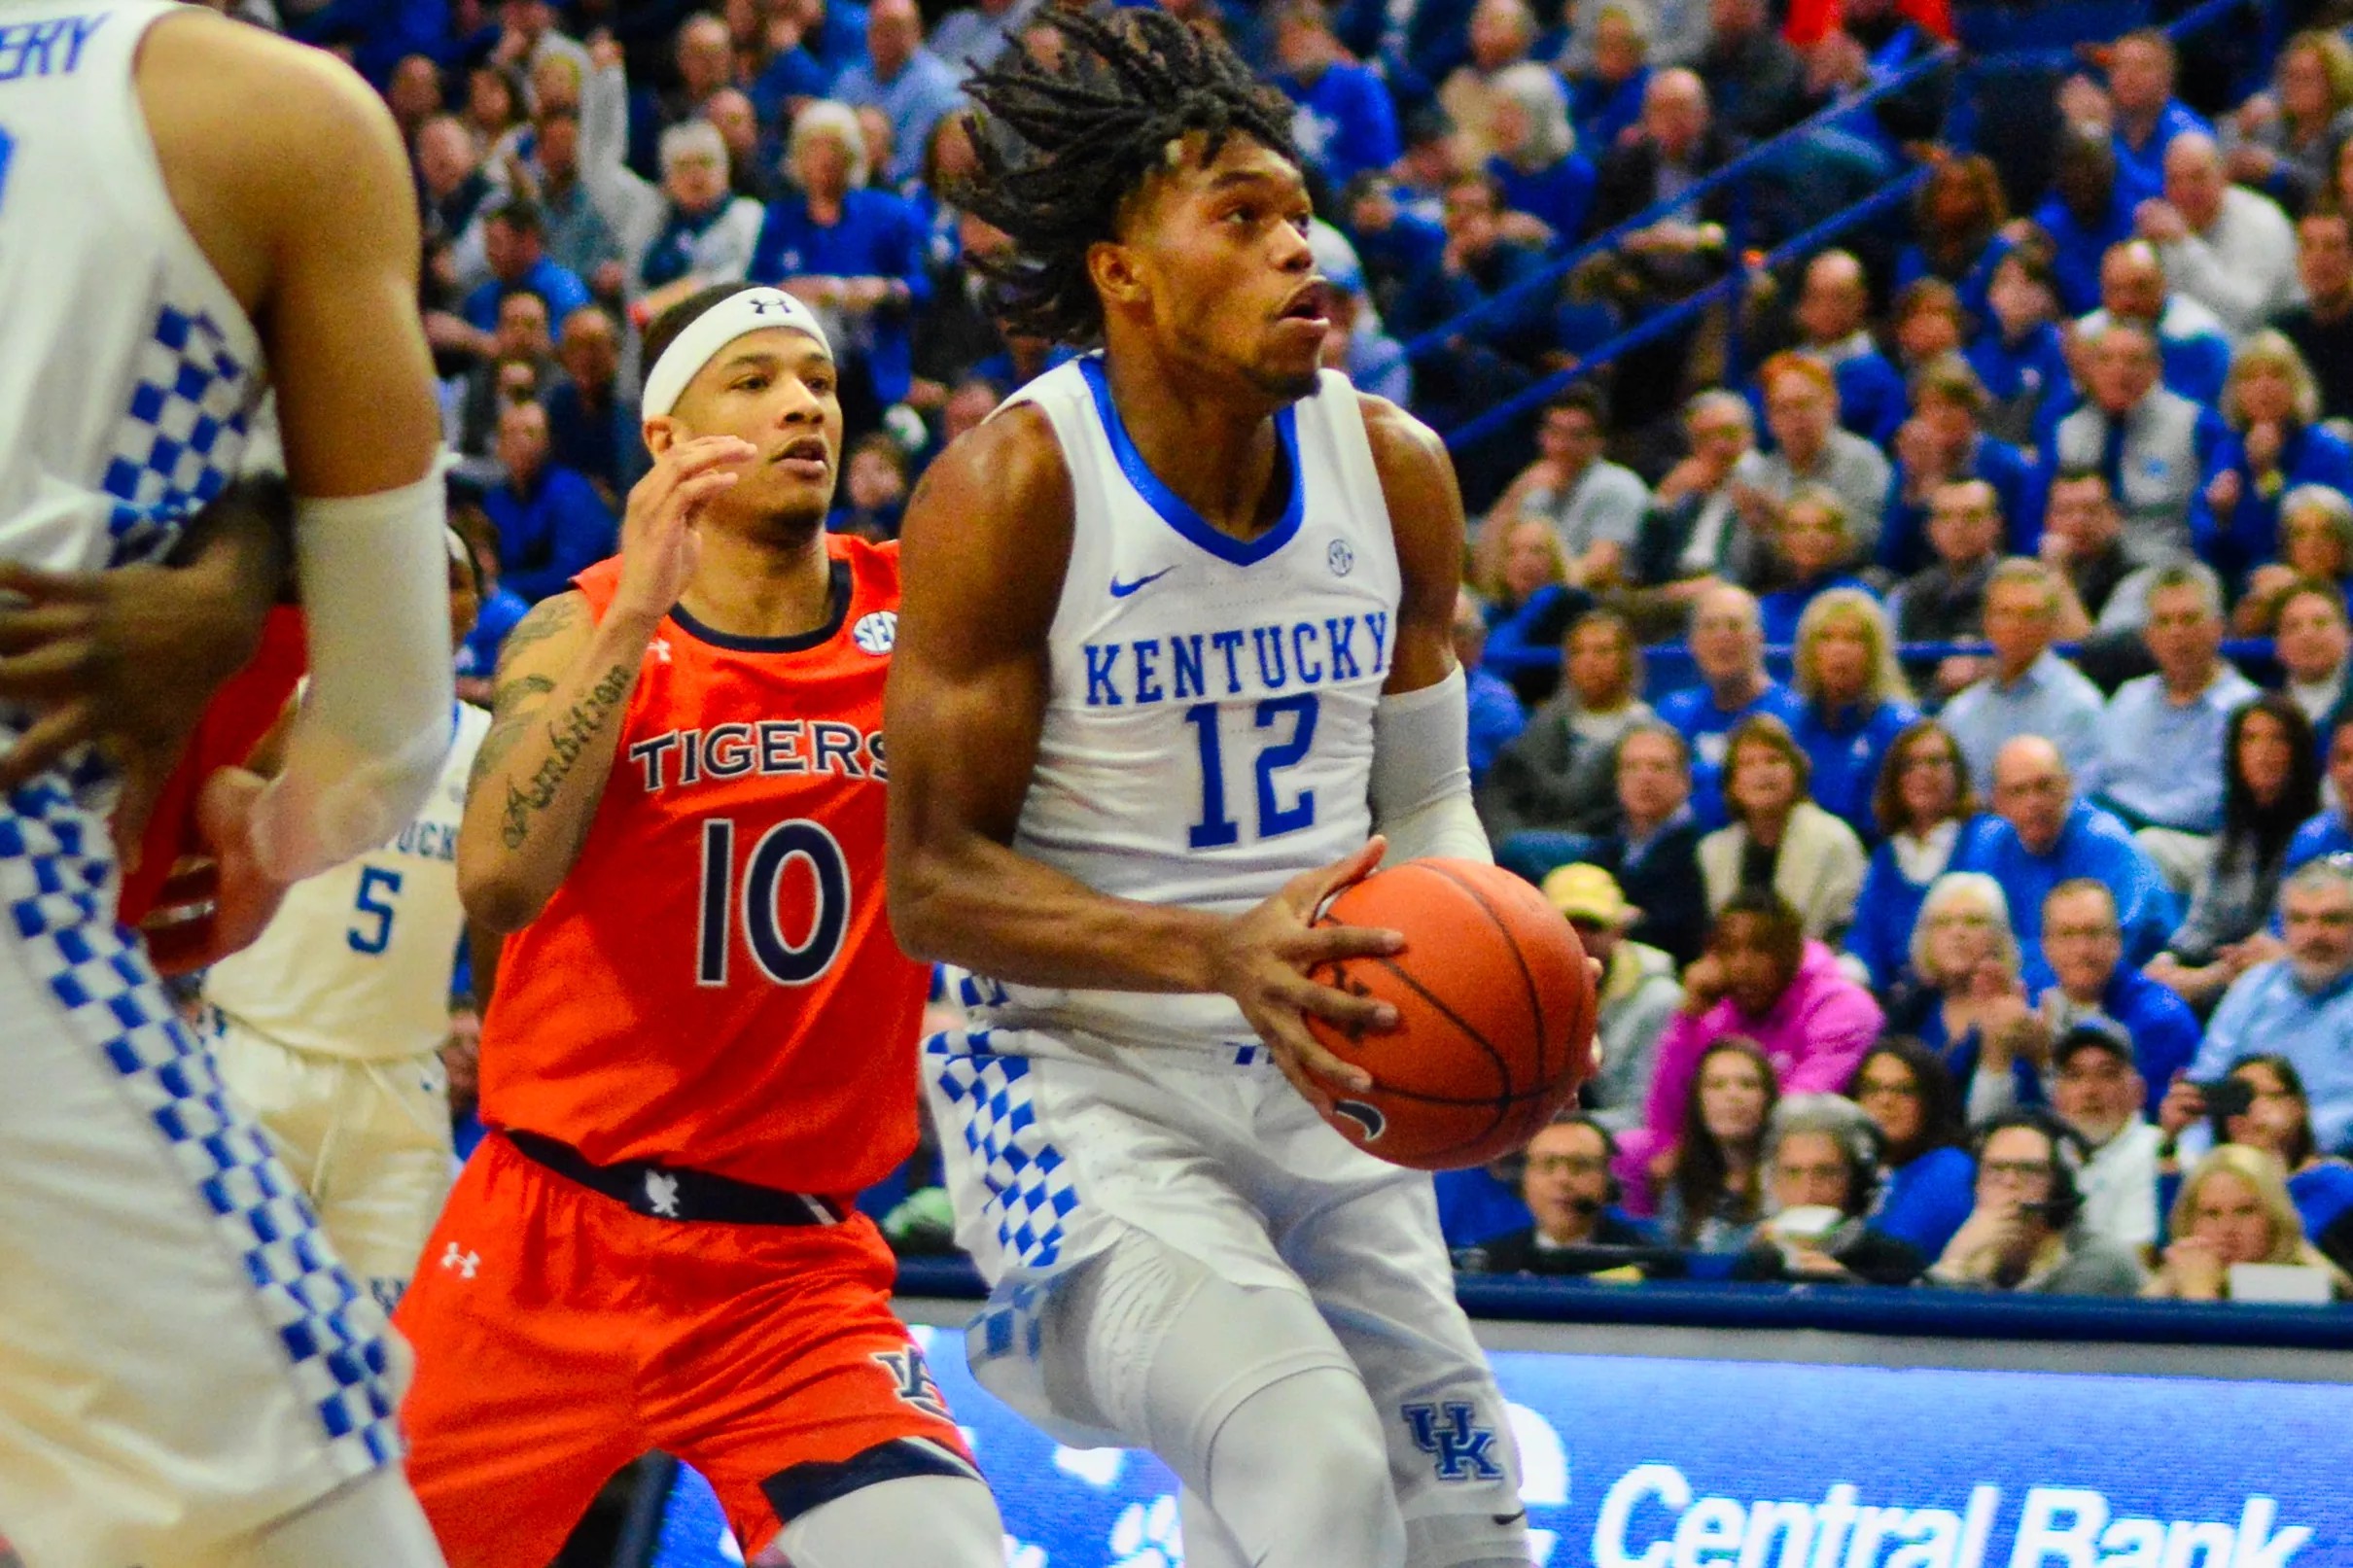 Kentucky vs. Auburn preview, viewing info and predictions